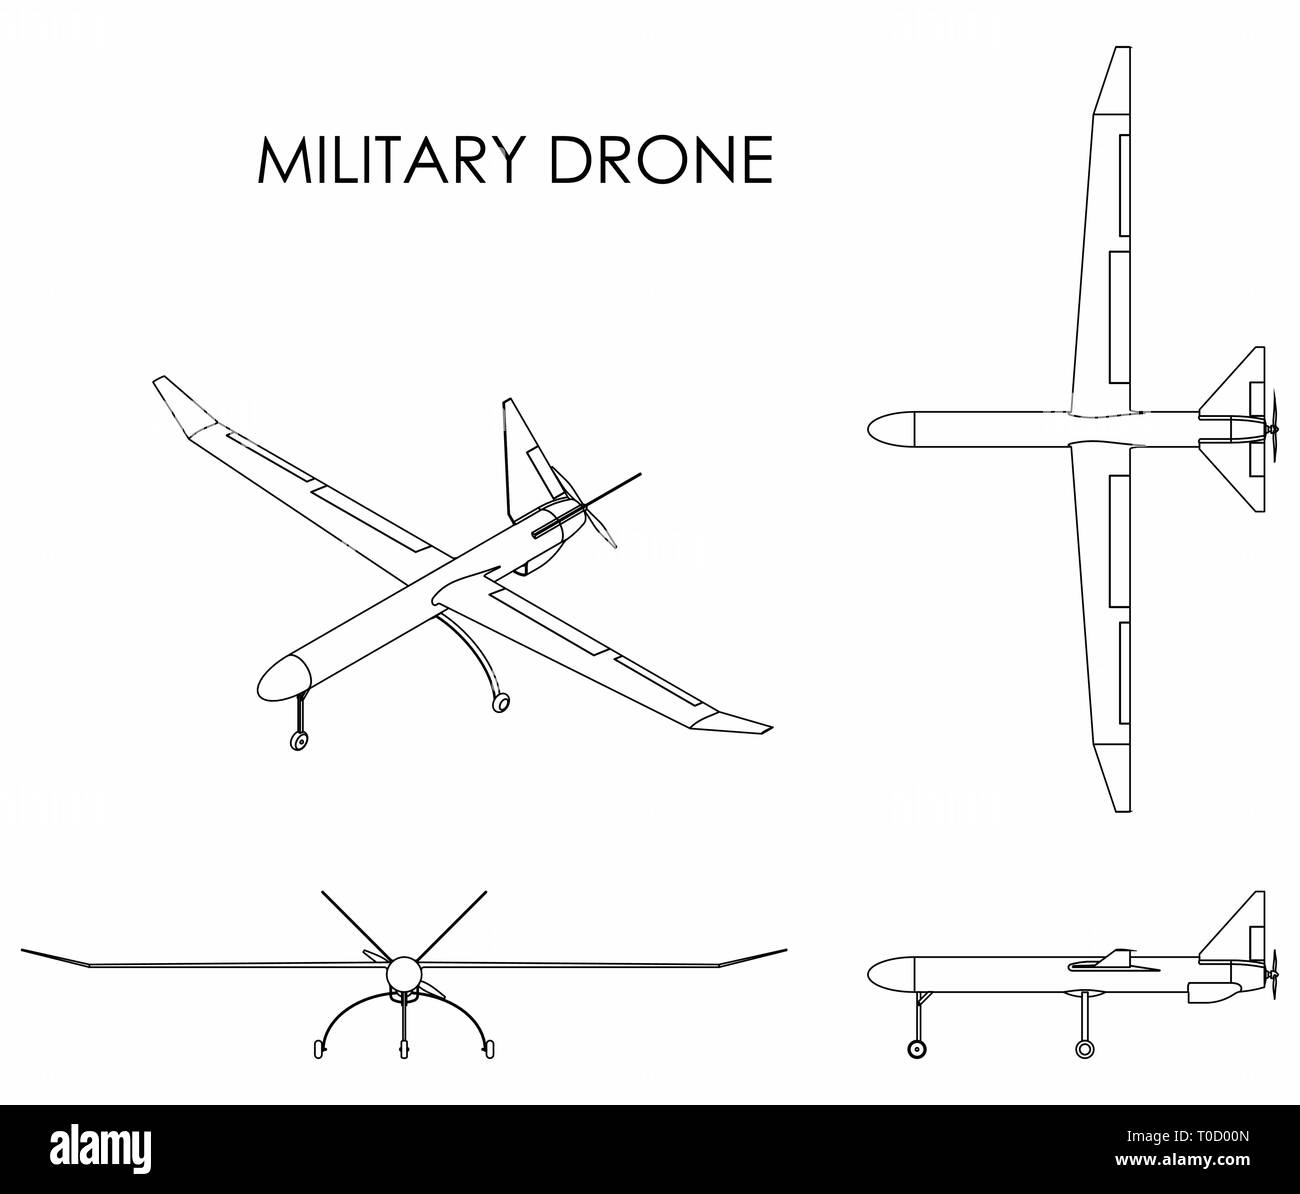 Military drone. Outline only. Stock Vector